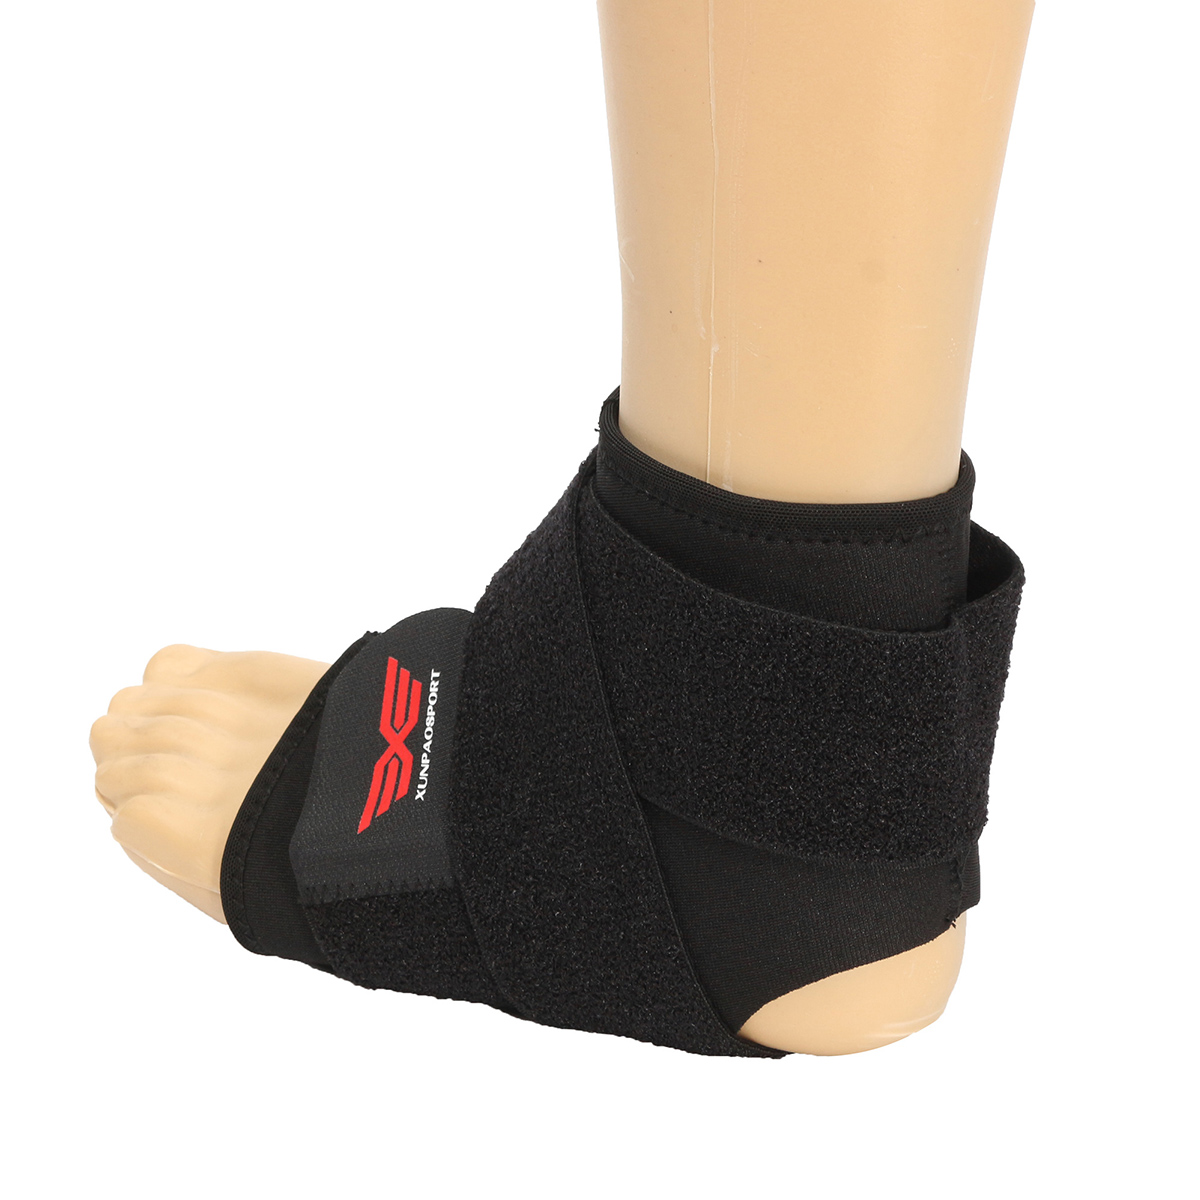 Adjustable-Rubber-Ankle-Support-Sport-Brace-Wrap-Strap-Foot-Sprain-Injury-Pain-Relief-1116524